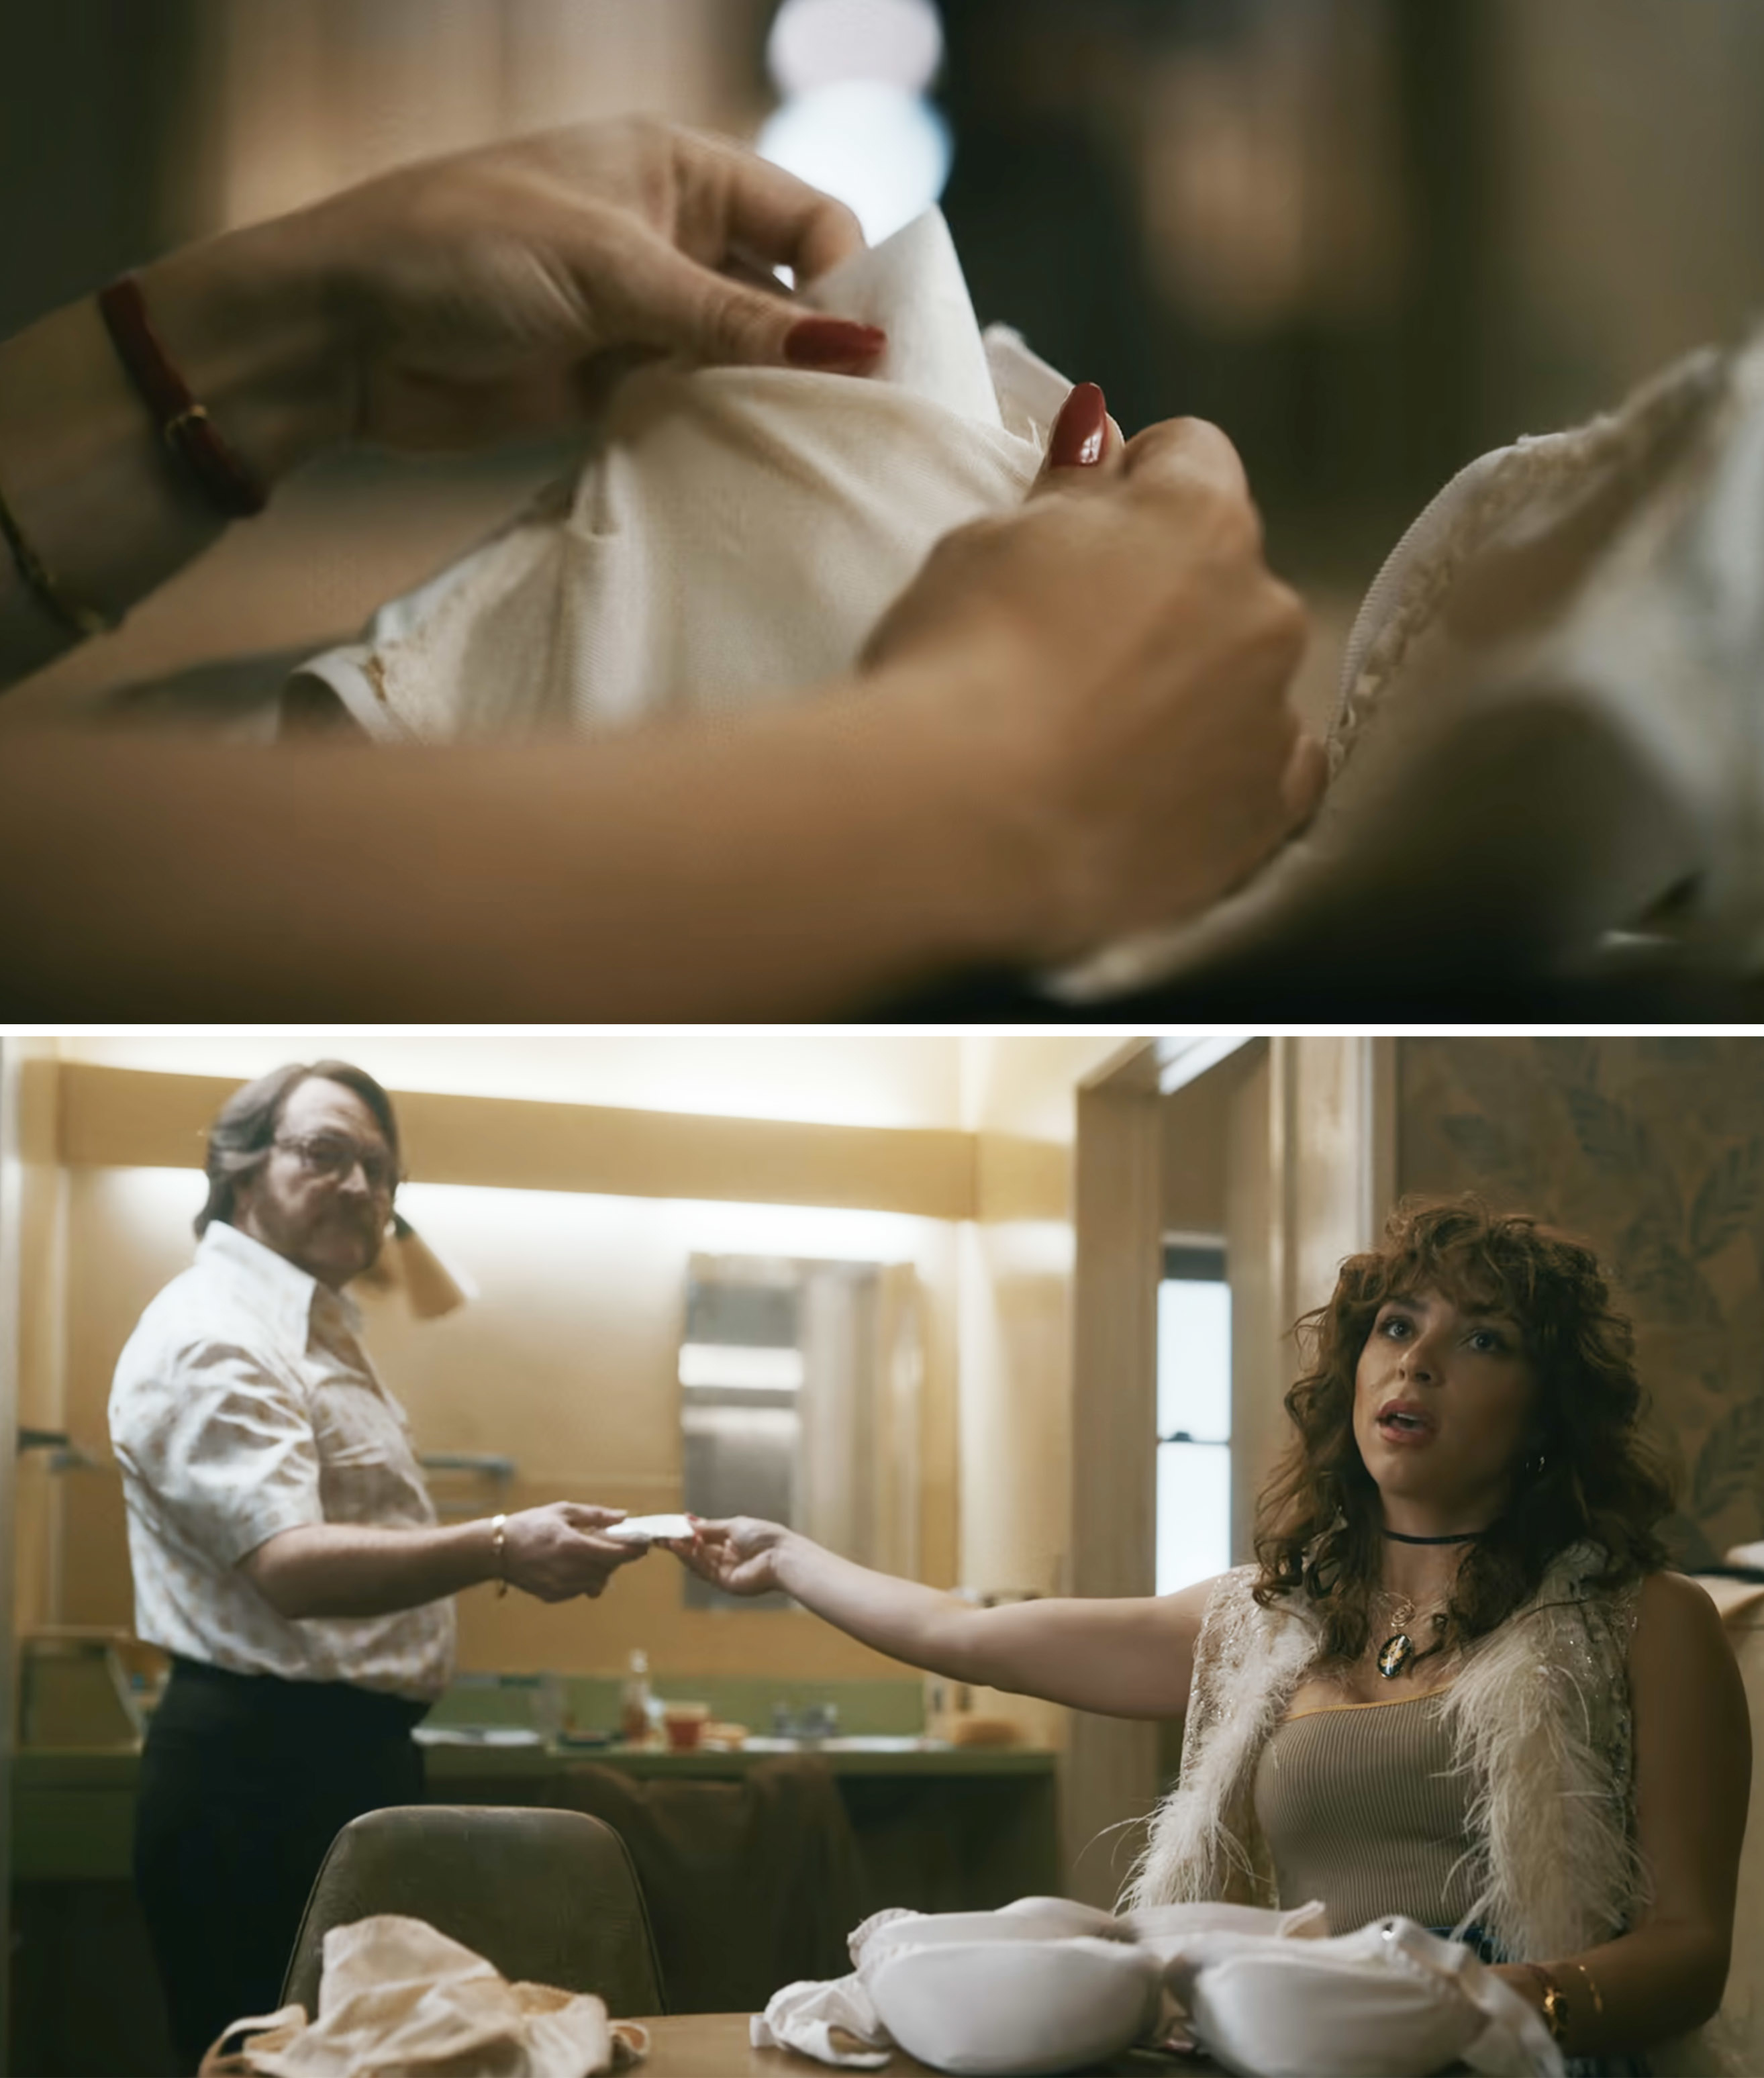 A bag of cocaine being sewn into lingerie in a scene from &quot;Griselda&quot;